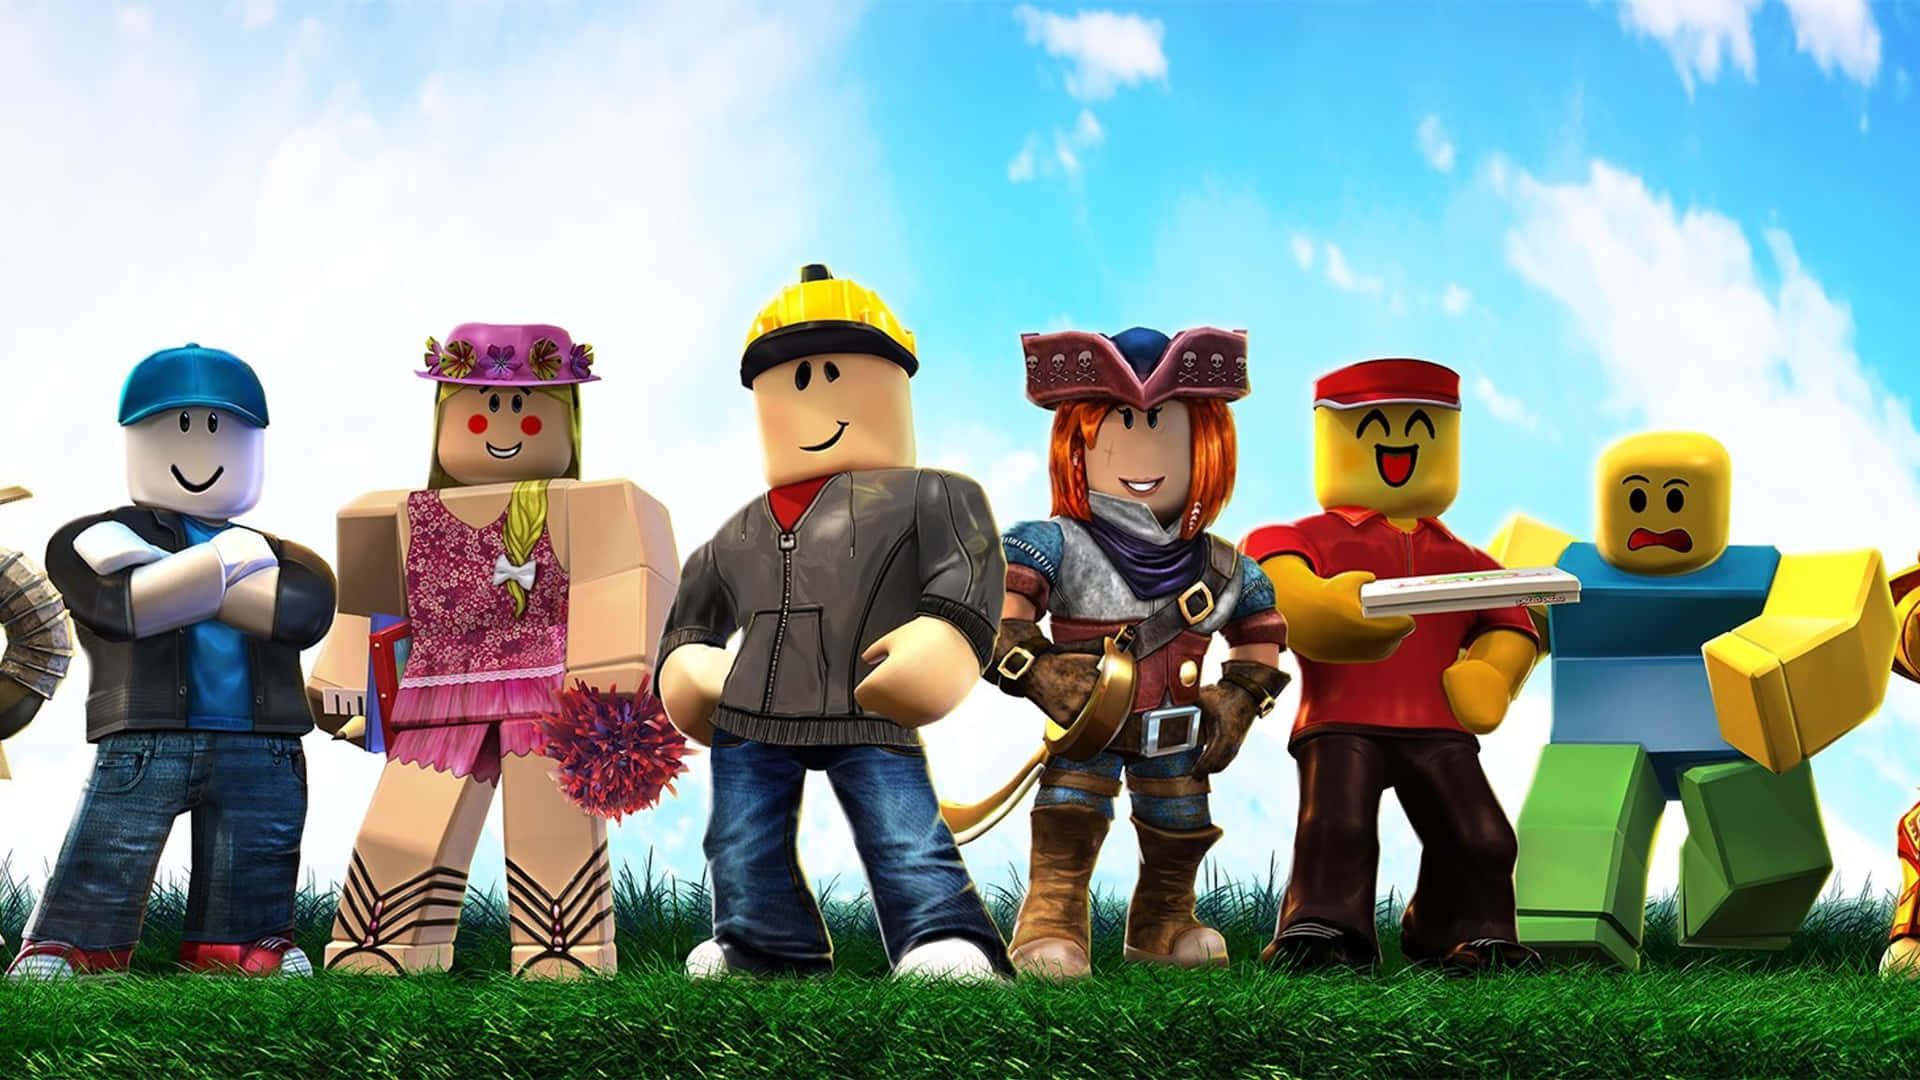 Download A Roblox Boy Ready for Adventure Wallpaper